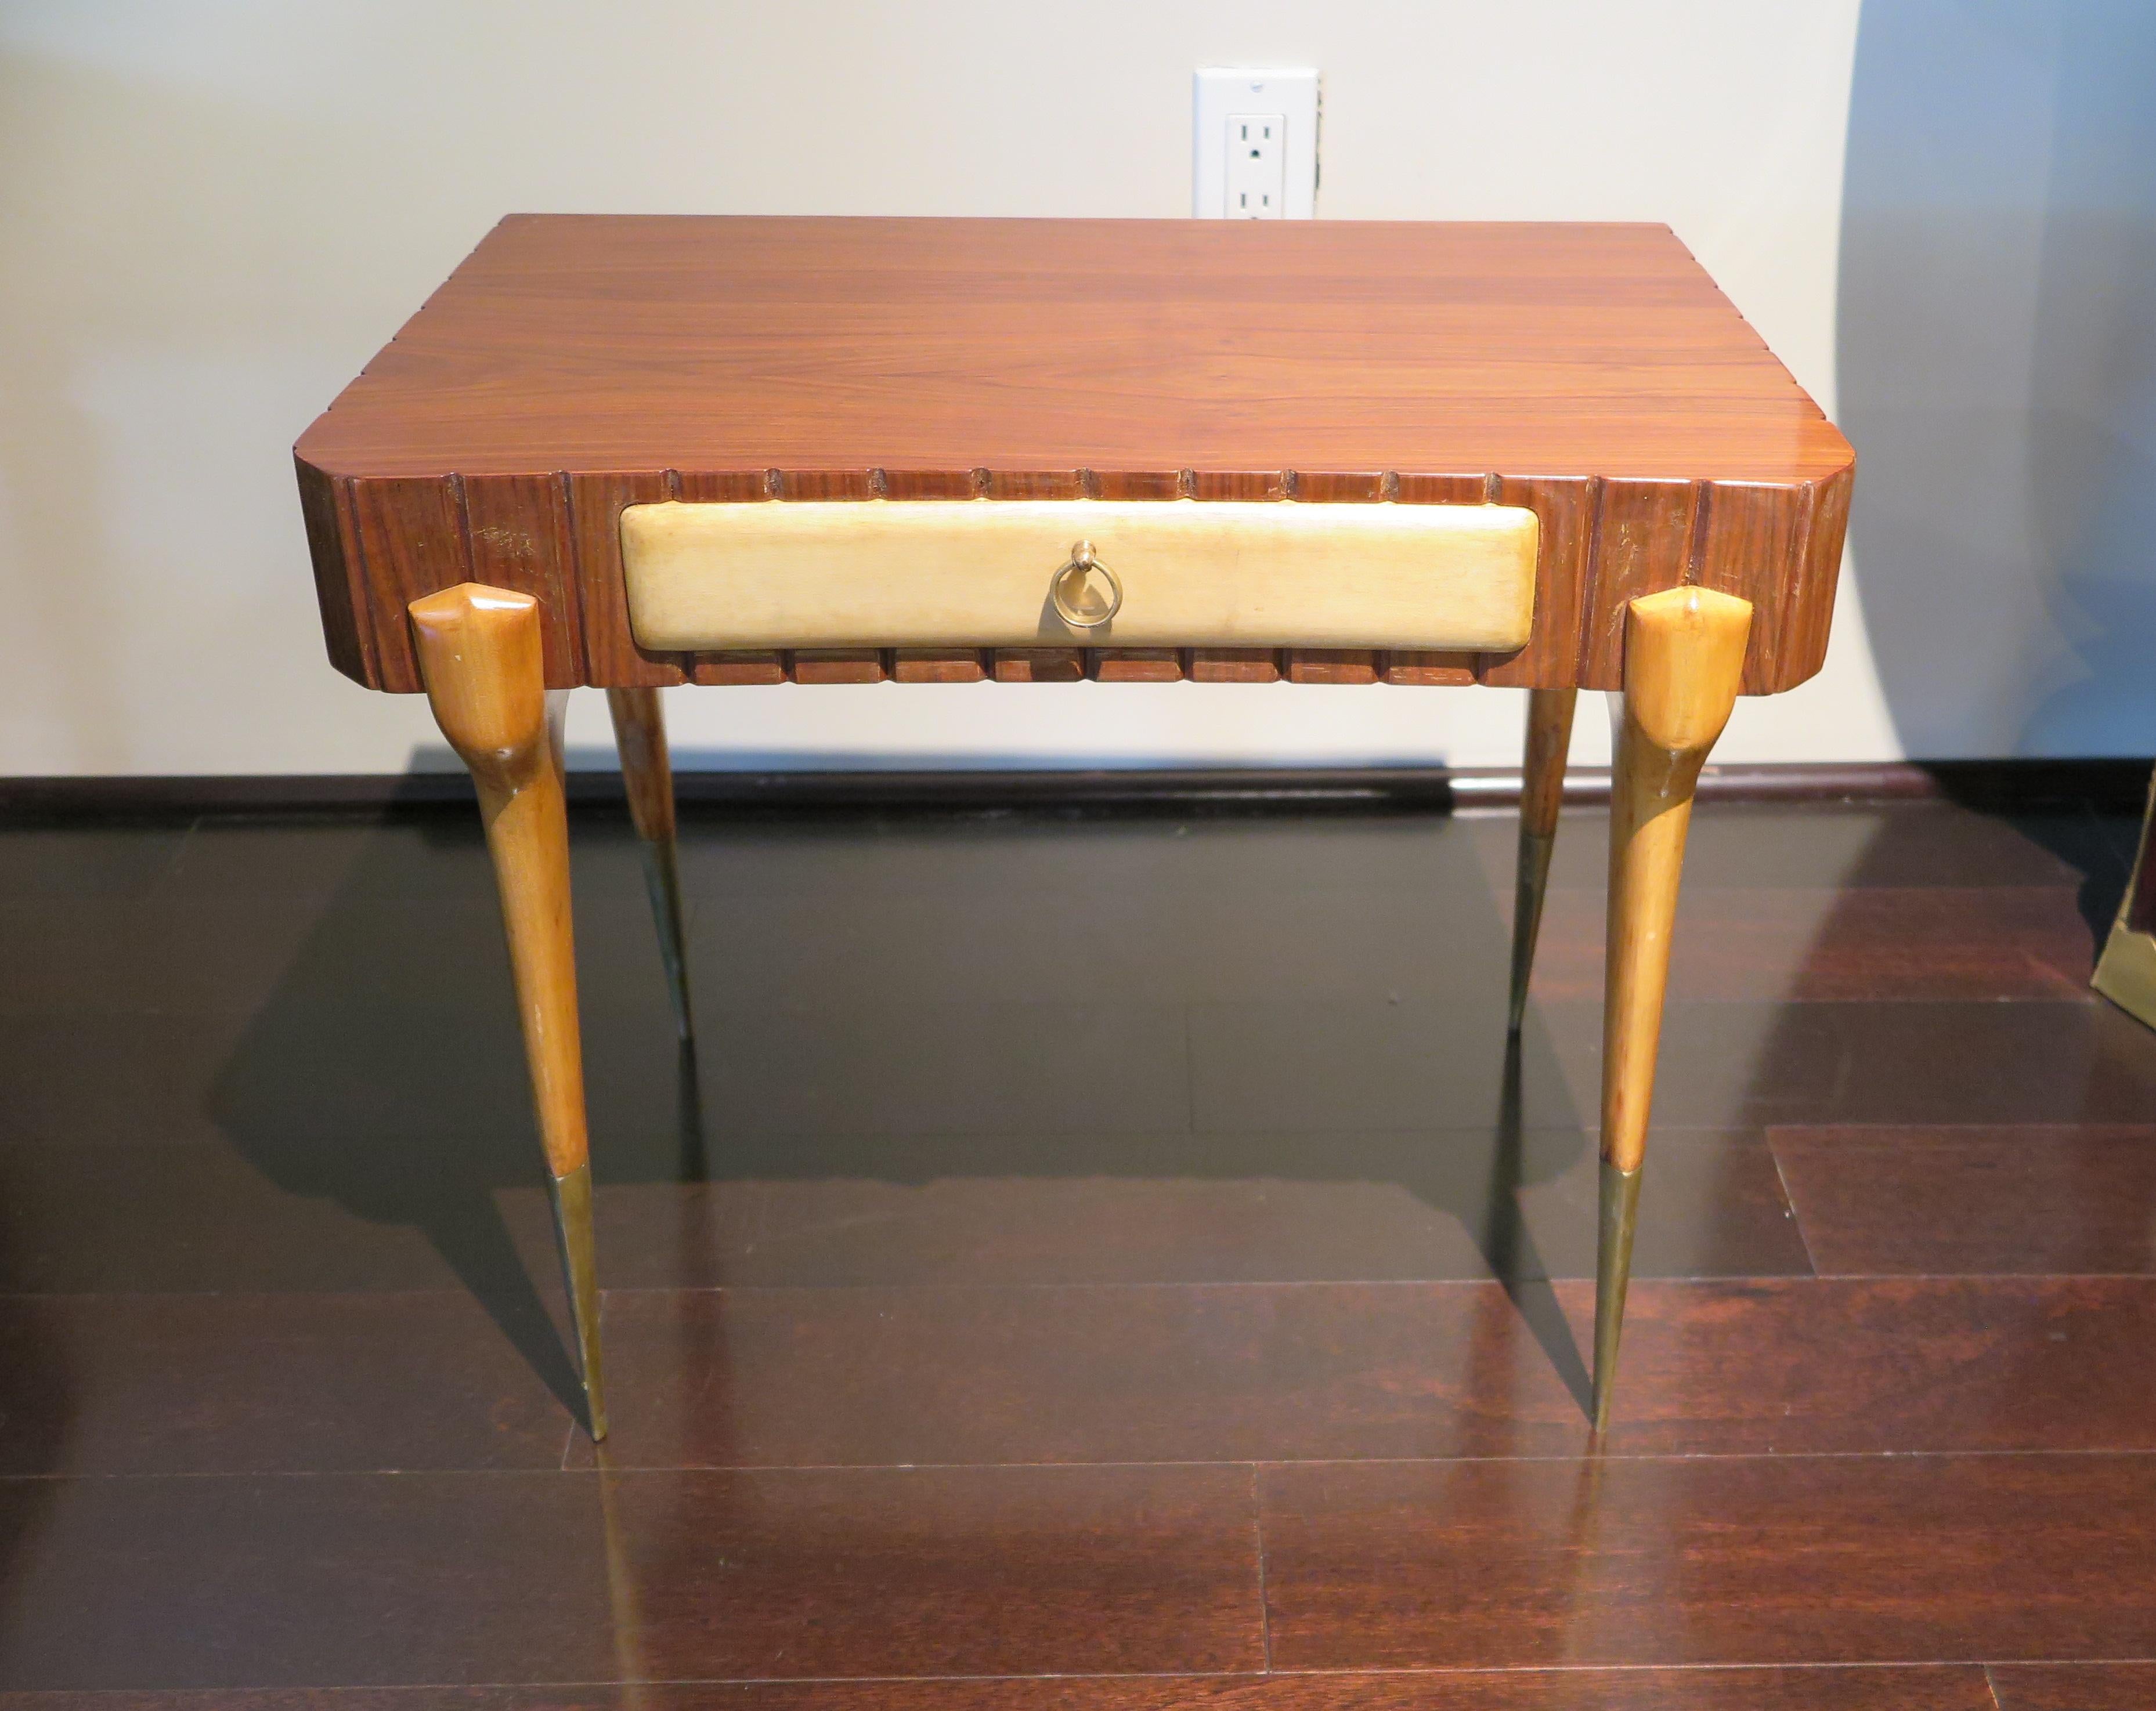 Pair of nightstands with frame in rosewood with ribbed design. Drawer fronts in parchment (goatskin) and legs in citron wood. Large tapered brass feet caps and ring drawer pull in brass. Original condition.